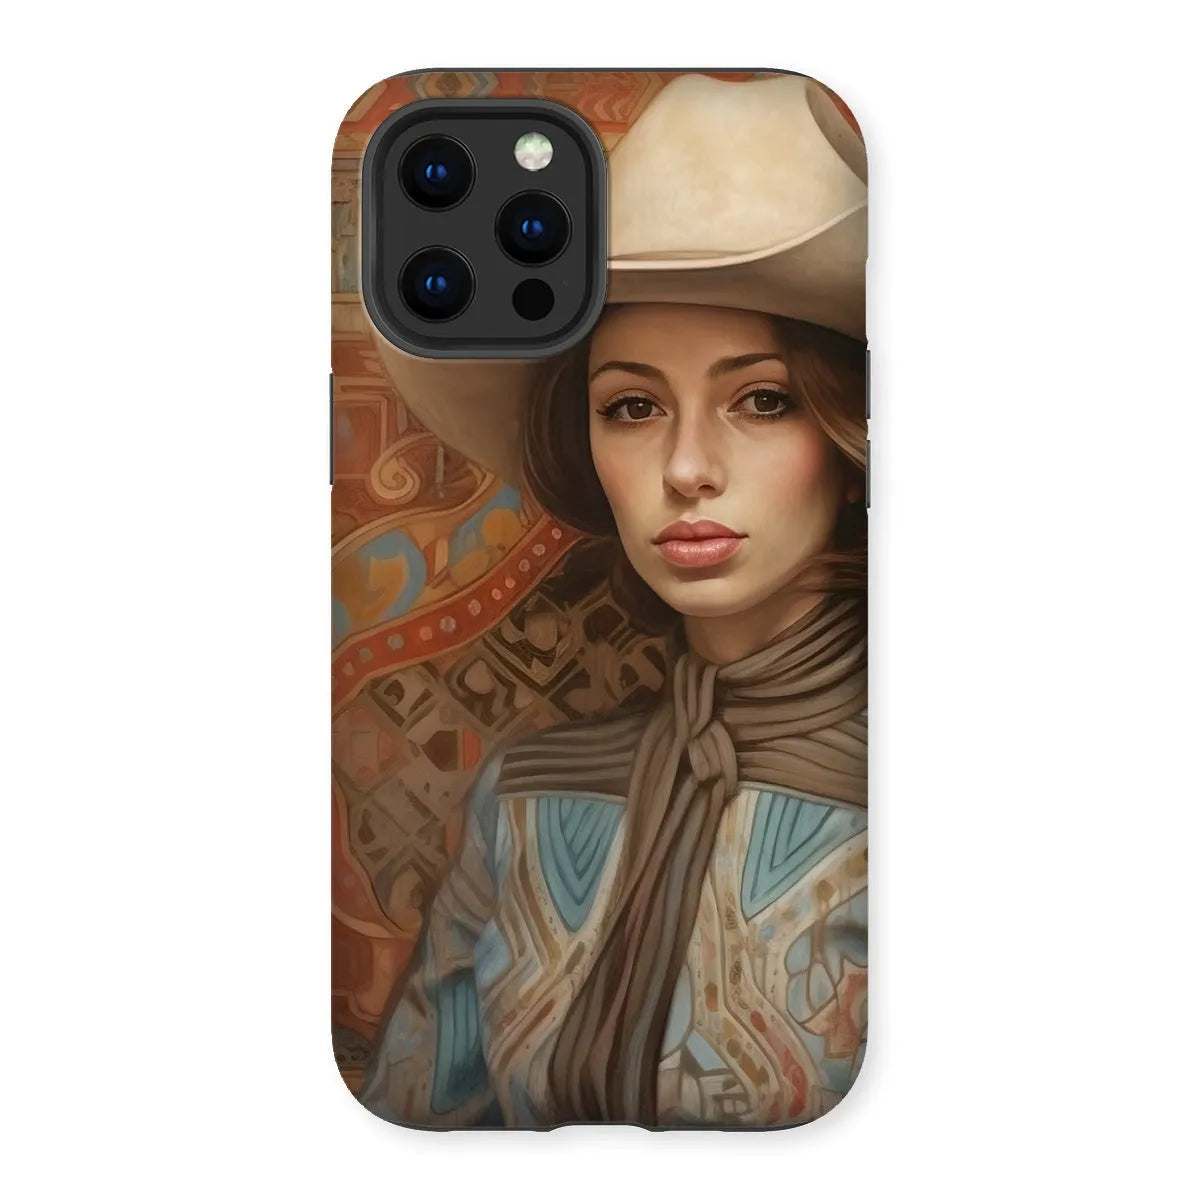 Anahita The Lesbian Cowgirl - Sapphic Art Phone Case - Iphone 13 Pro Max / Matte - Mobile Phone Cases - Aesthetic Art